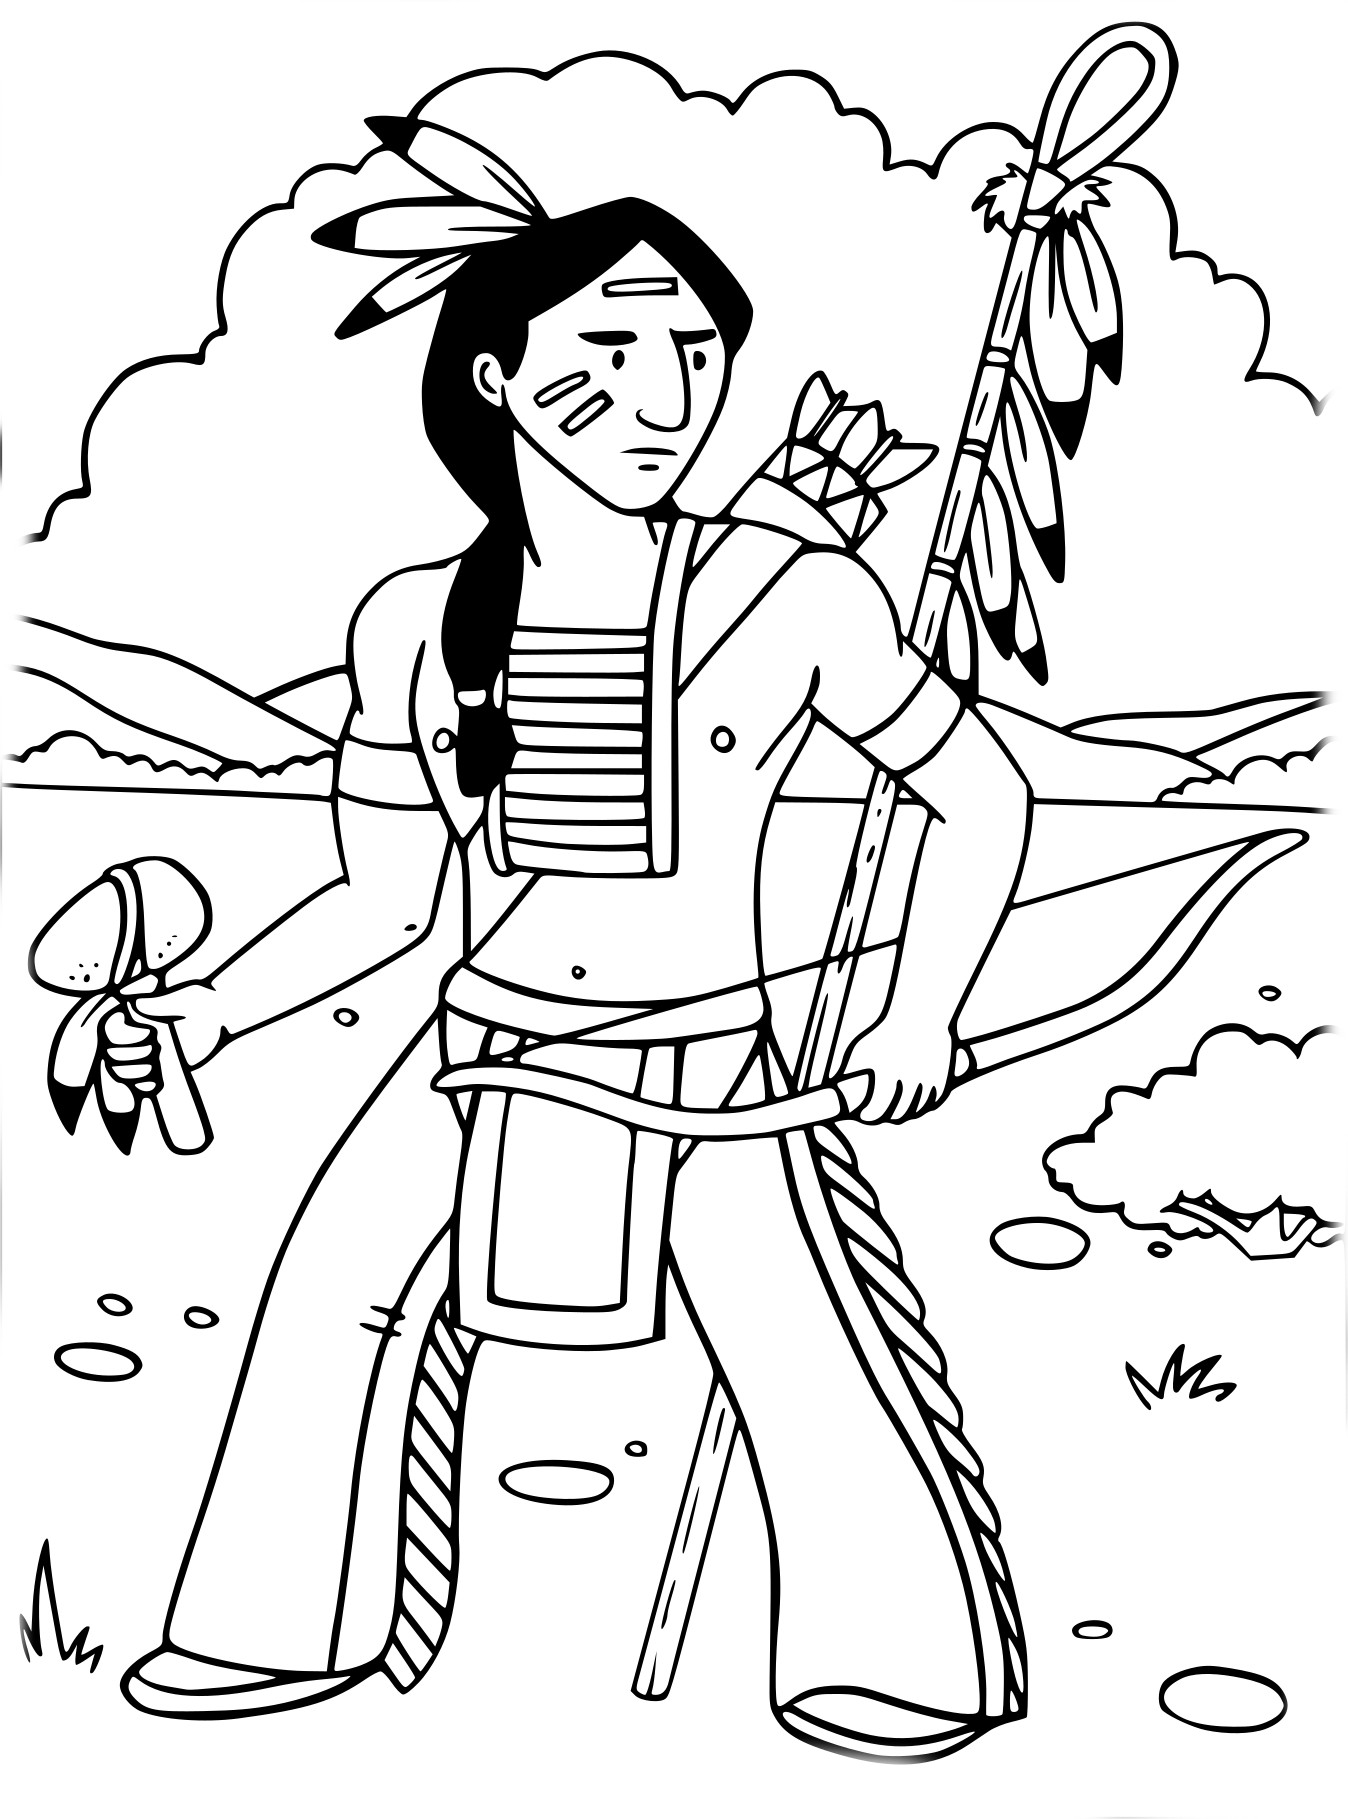 Indian drawing and coloring page